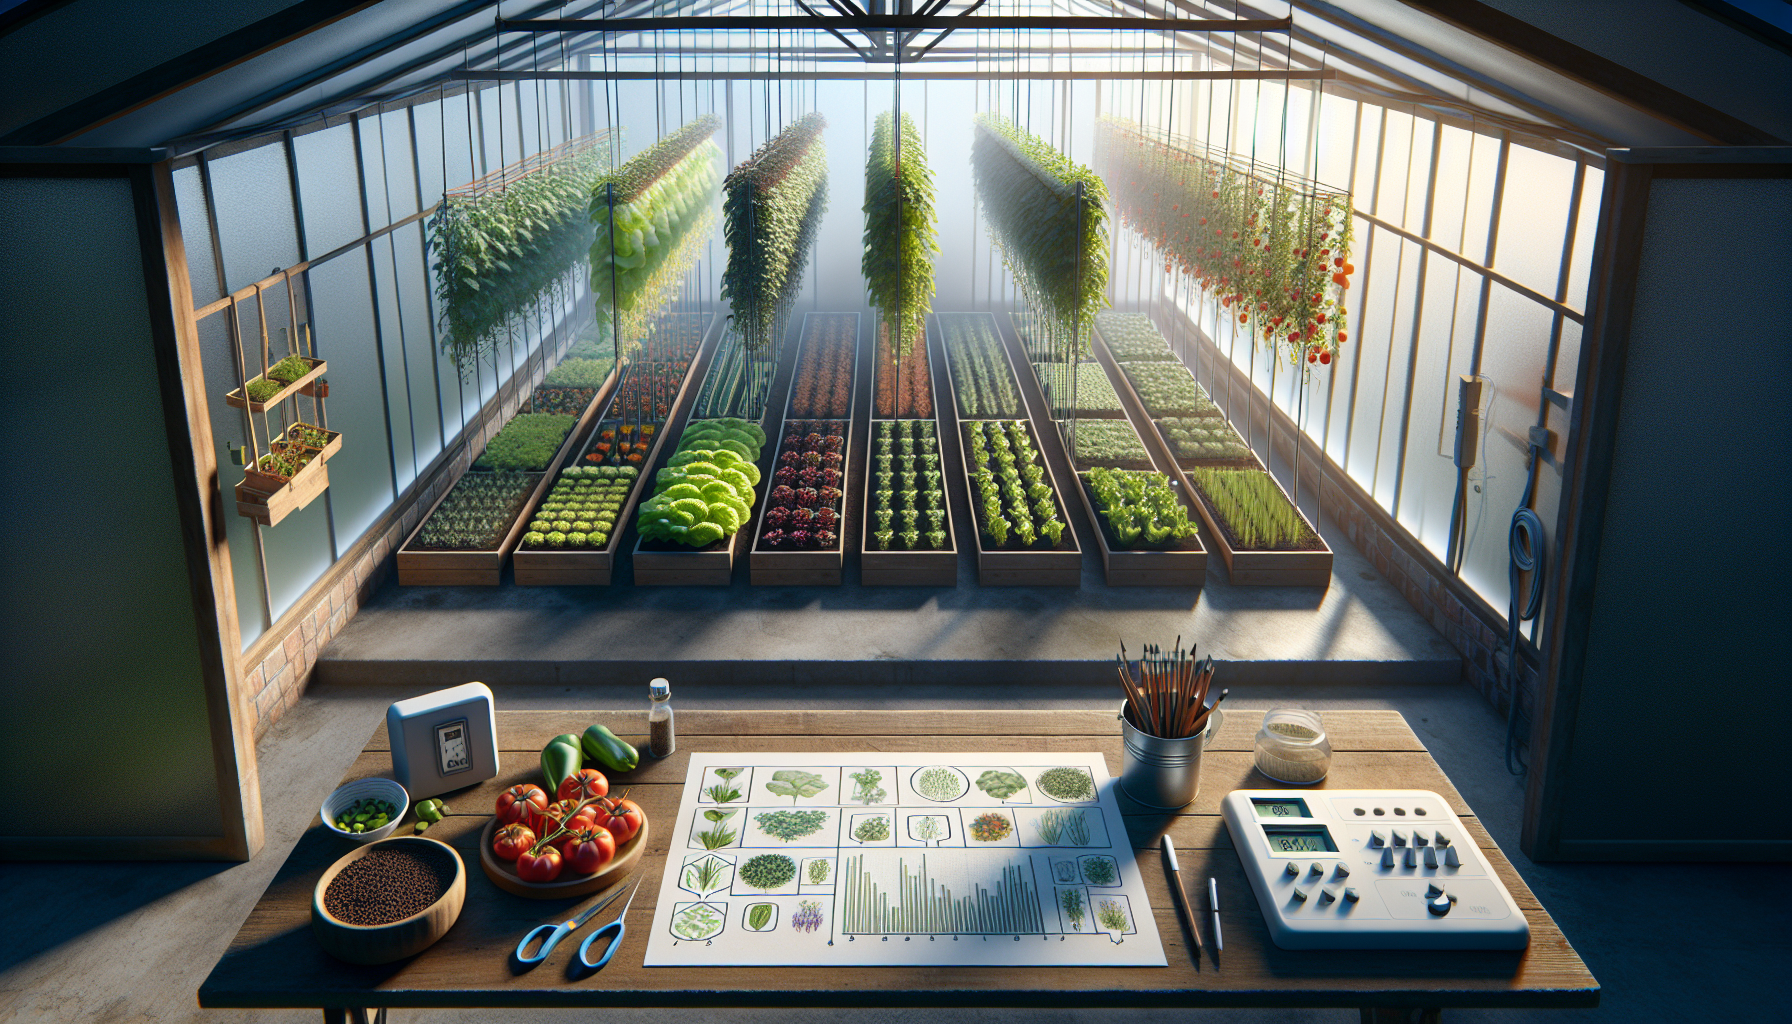 Maximizing Your Produce: Square Foot Gardening in a Greenhouse